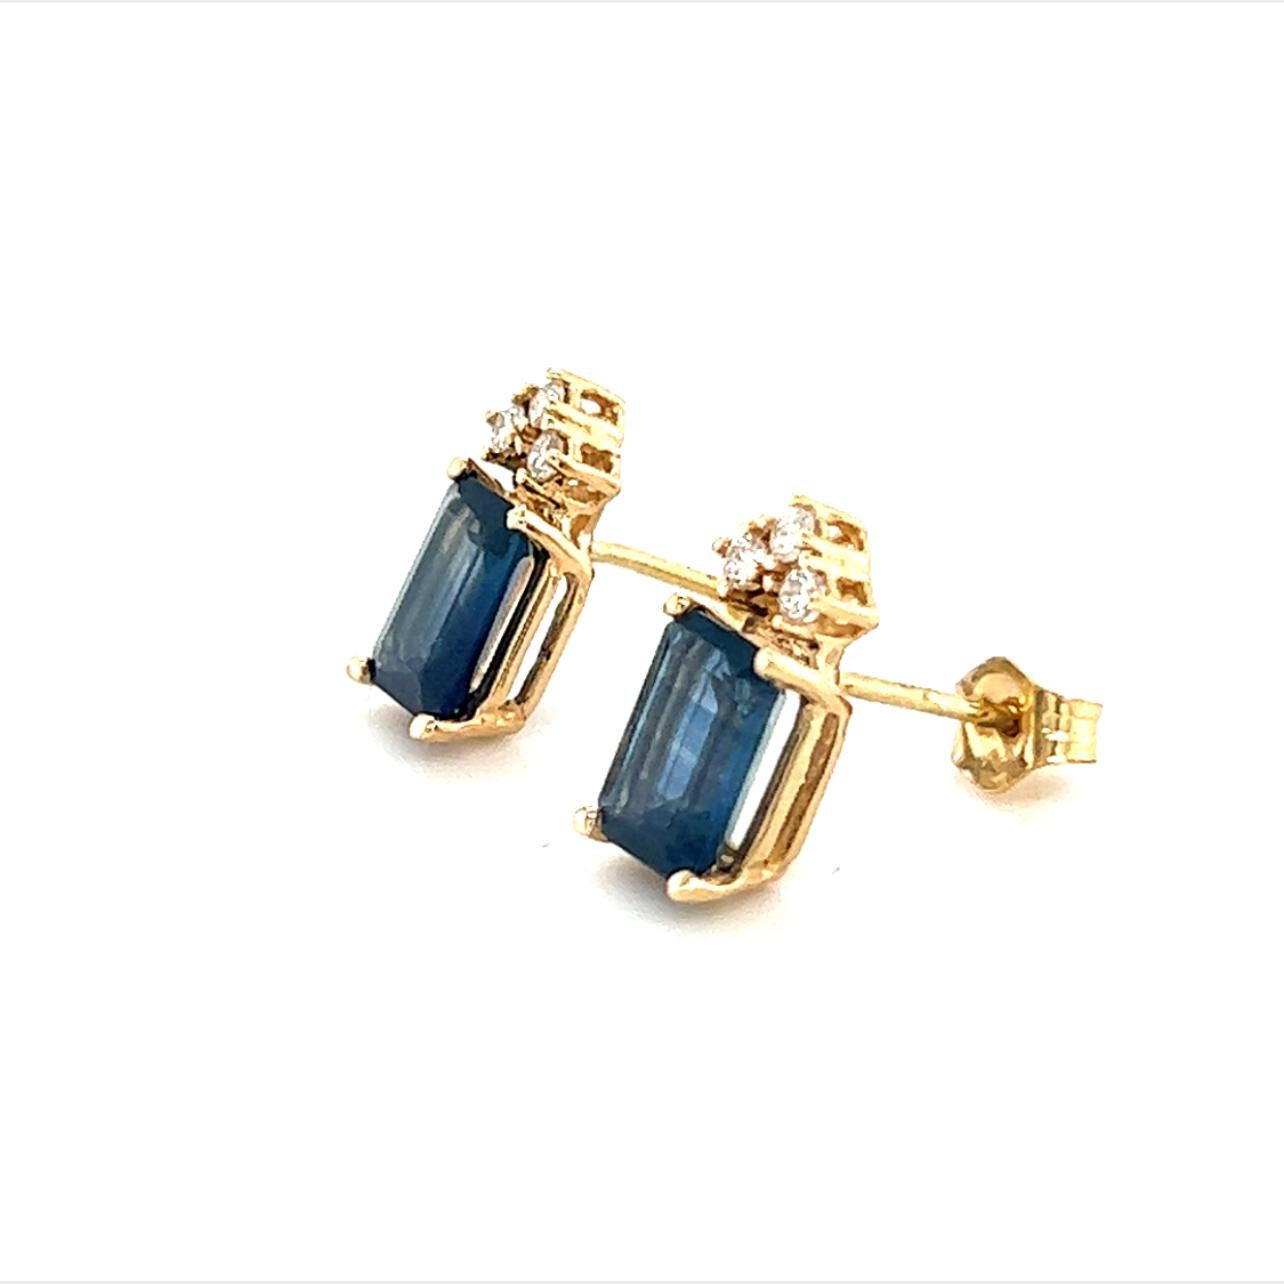 Natural Sapphire Diamond Earrings 14k Gold 2.14 TCW Certified For Sale 3